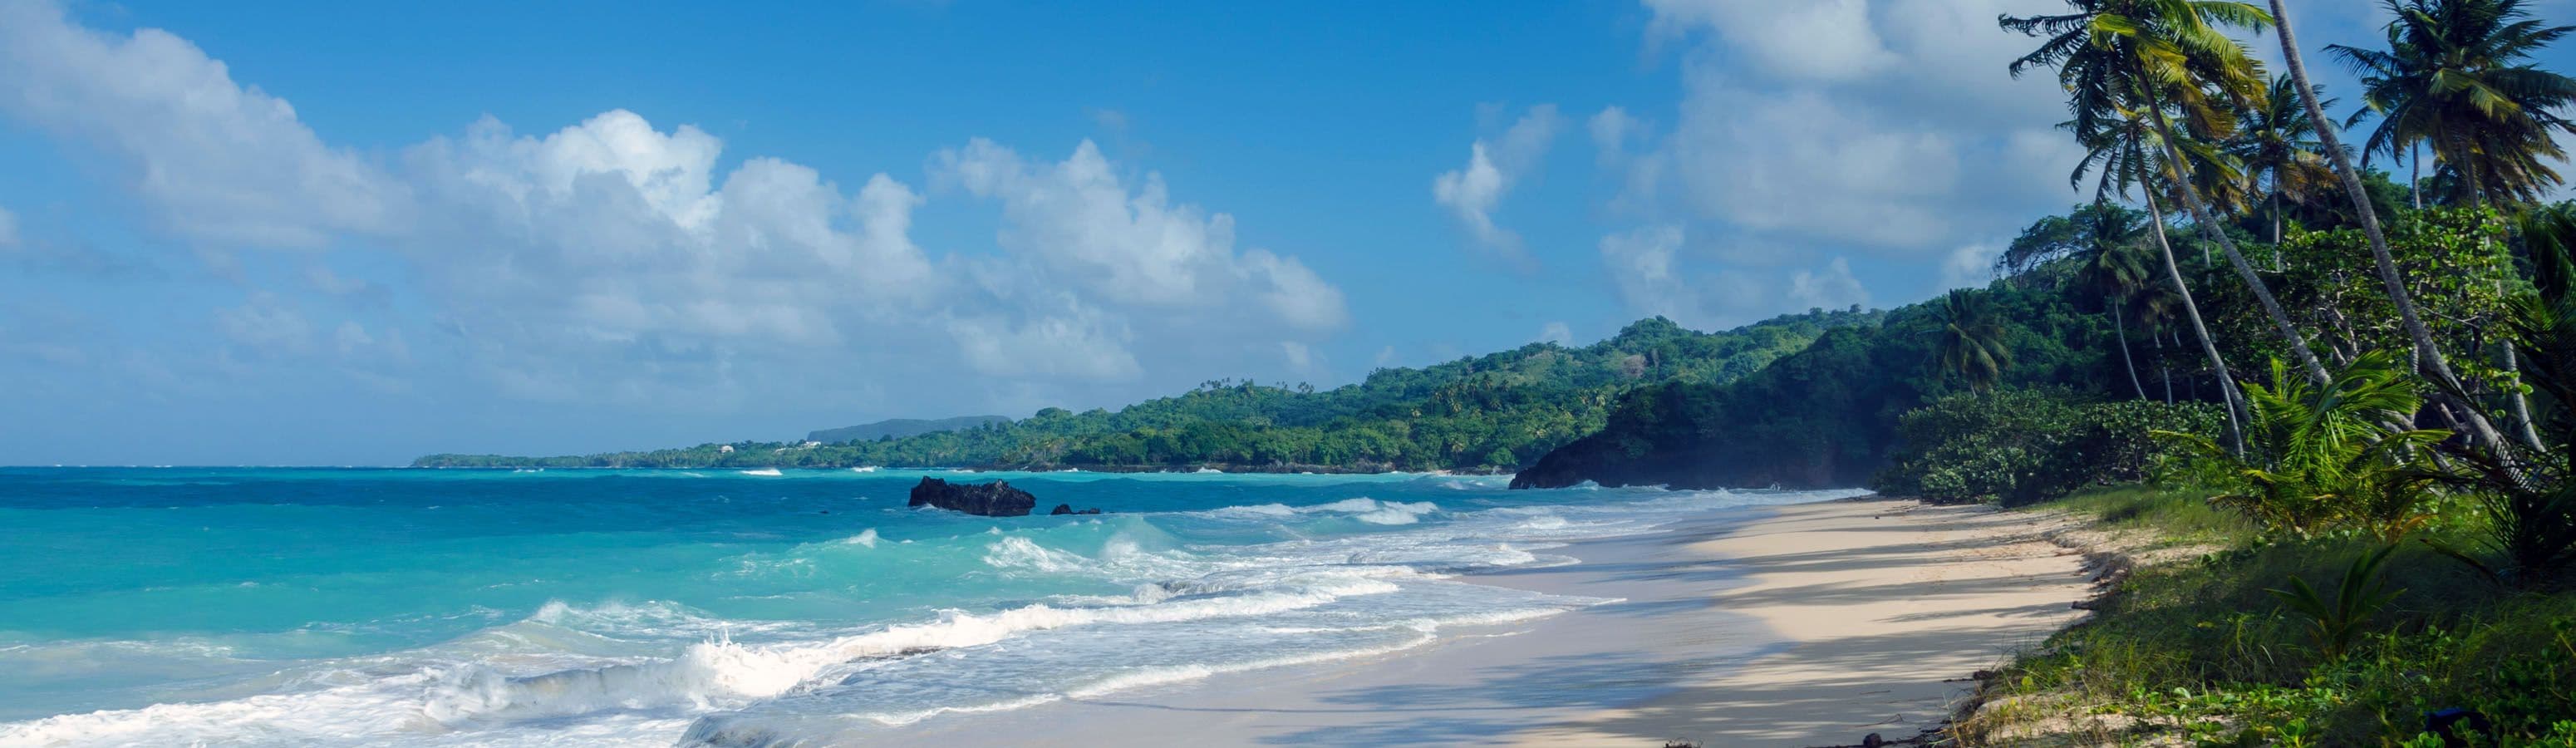 Relax on one of the most beautiful beaches on Samaná Island